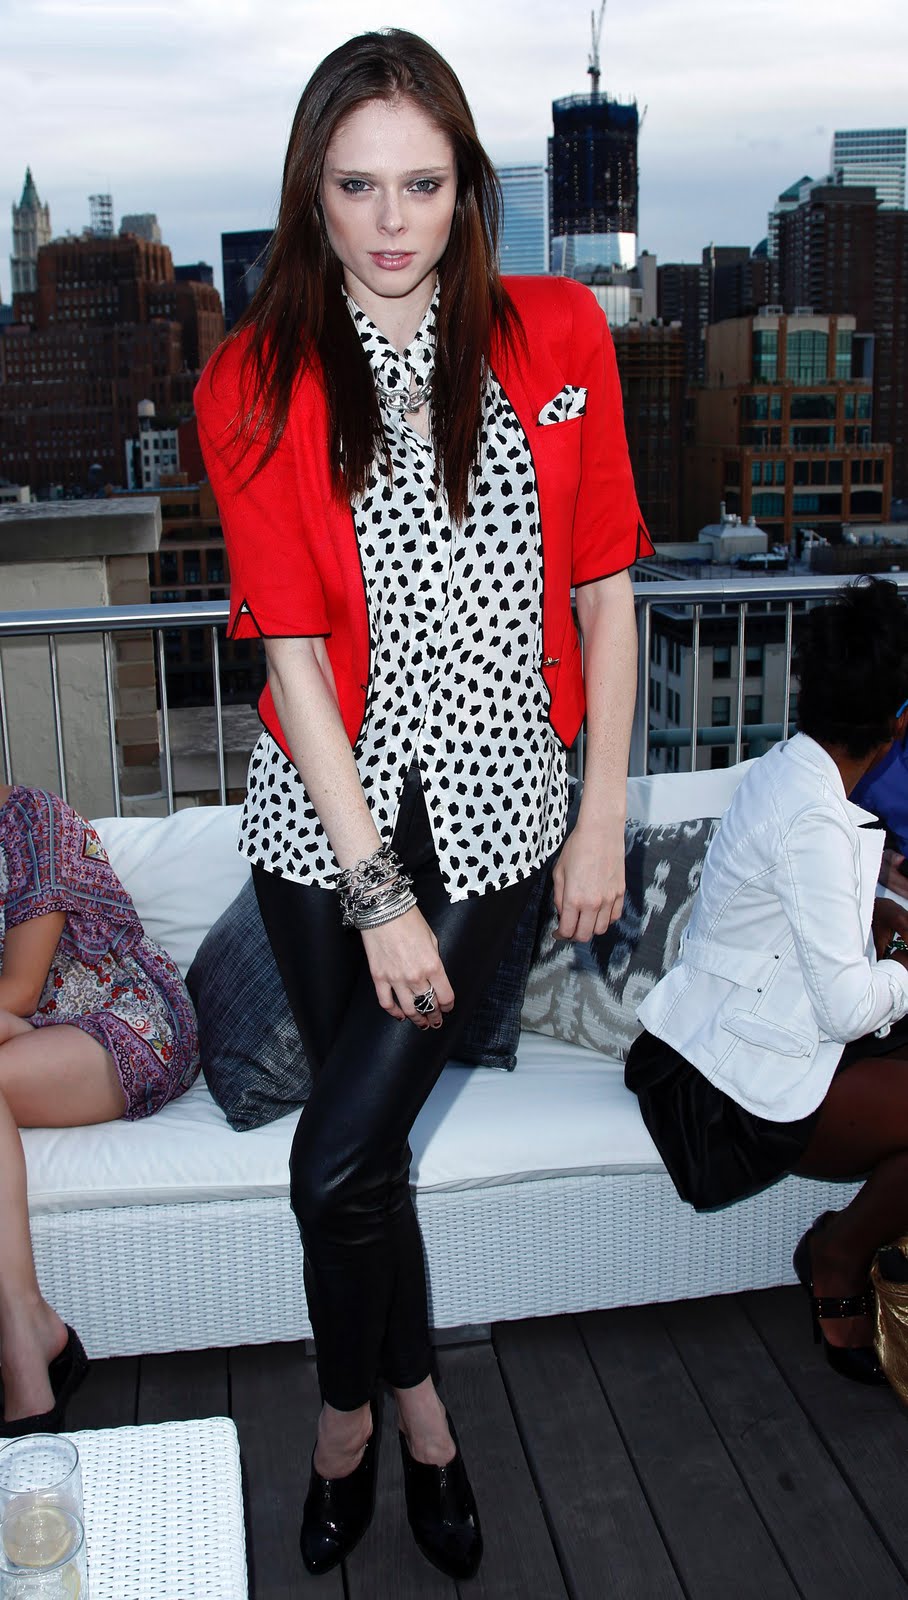 Coco Rocha Attends David Yurman's 'Sunset Over the Hudson' Event